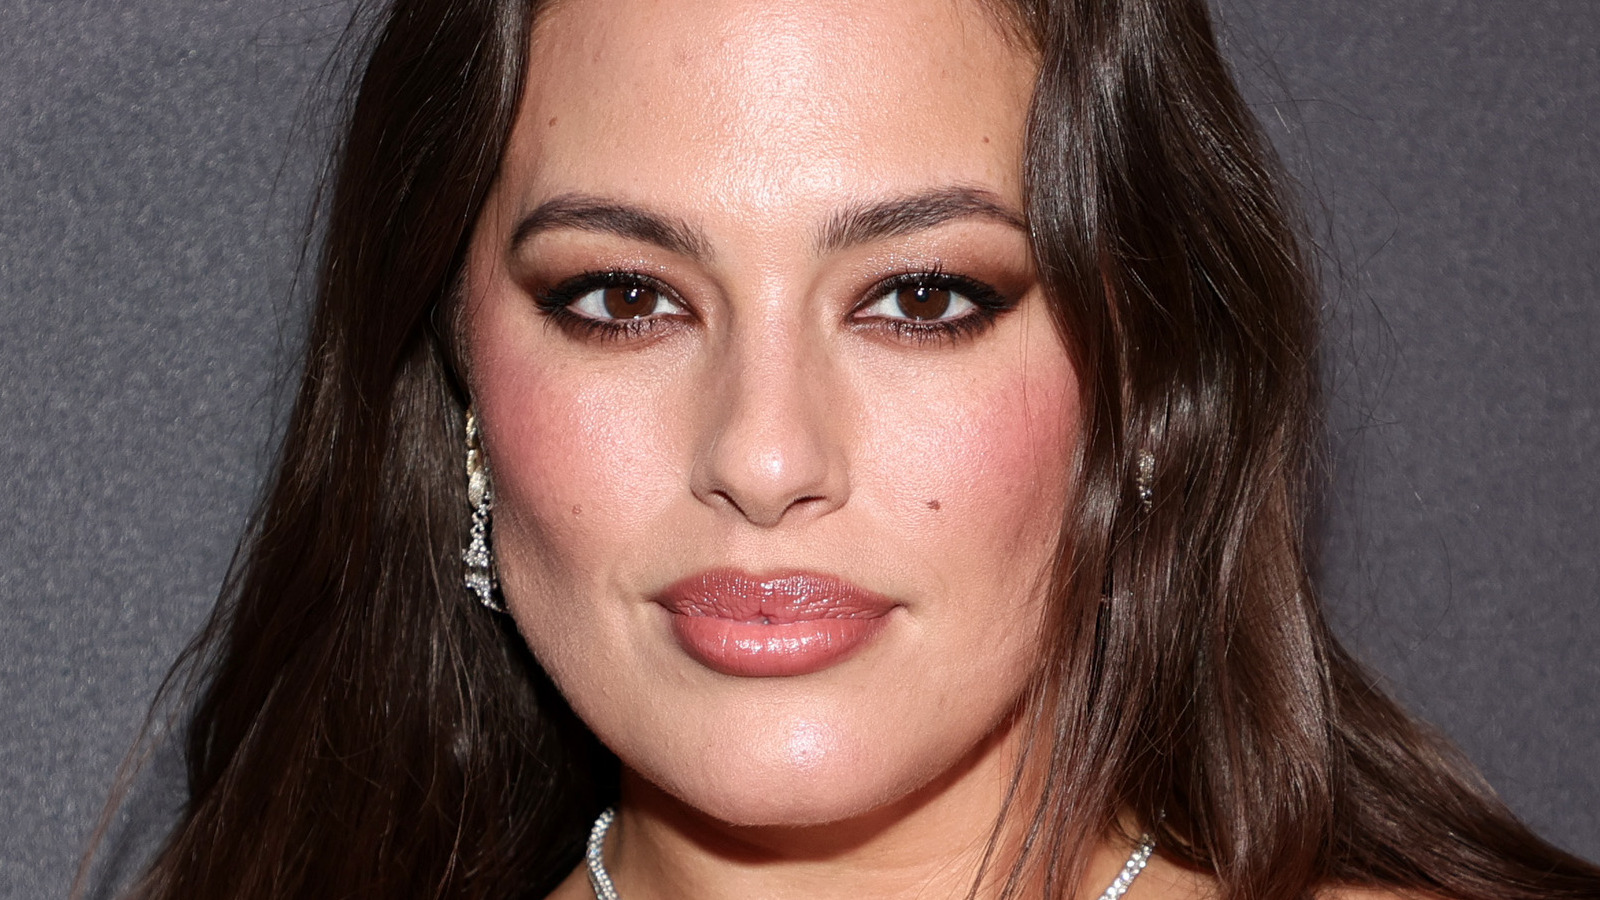 The Transformation Of Ashley Graham From Childhood To 34 Years Old